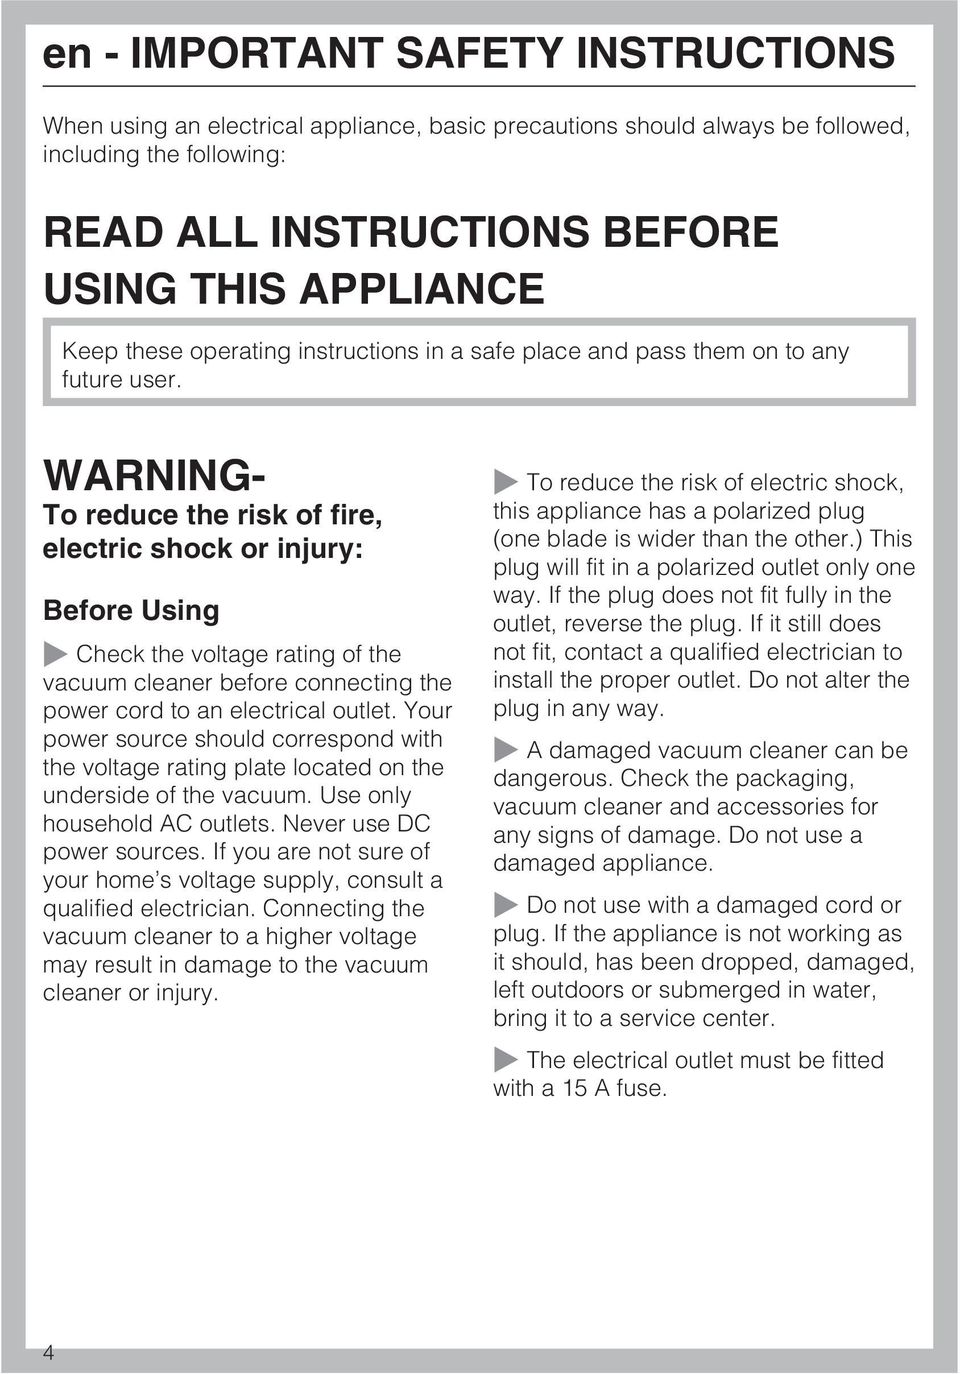 WARNING- To reduce the risk of fire, electric shock or injury: Before Using Check the voltage rating of the vacuum cleaner before connecting the power cord to an electrical outlet.